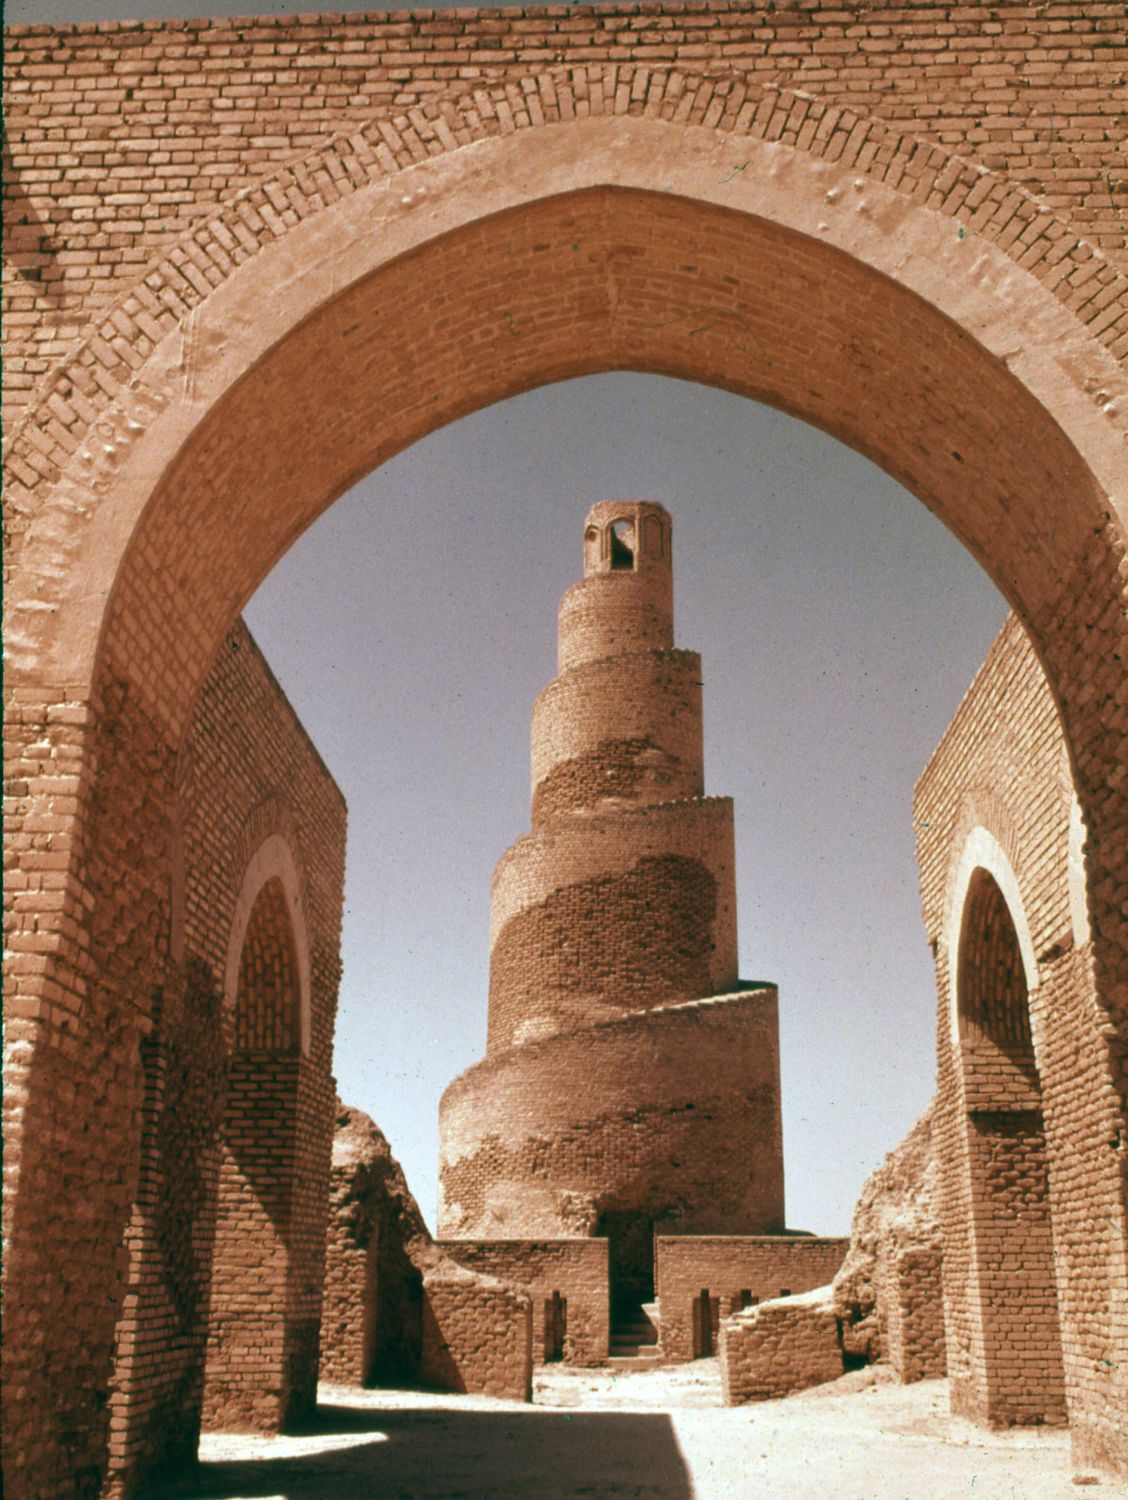 View of spiral minaret from within the mosque arcades, looking north.